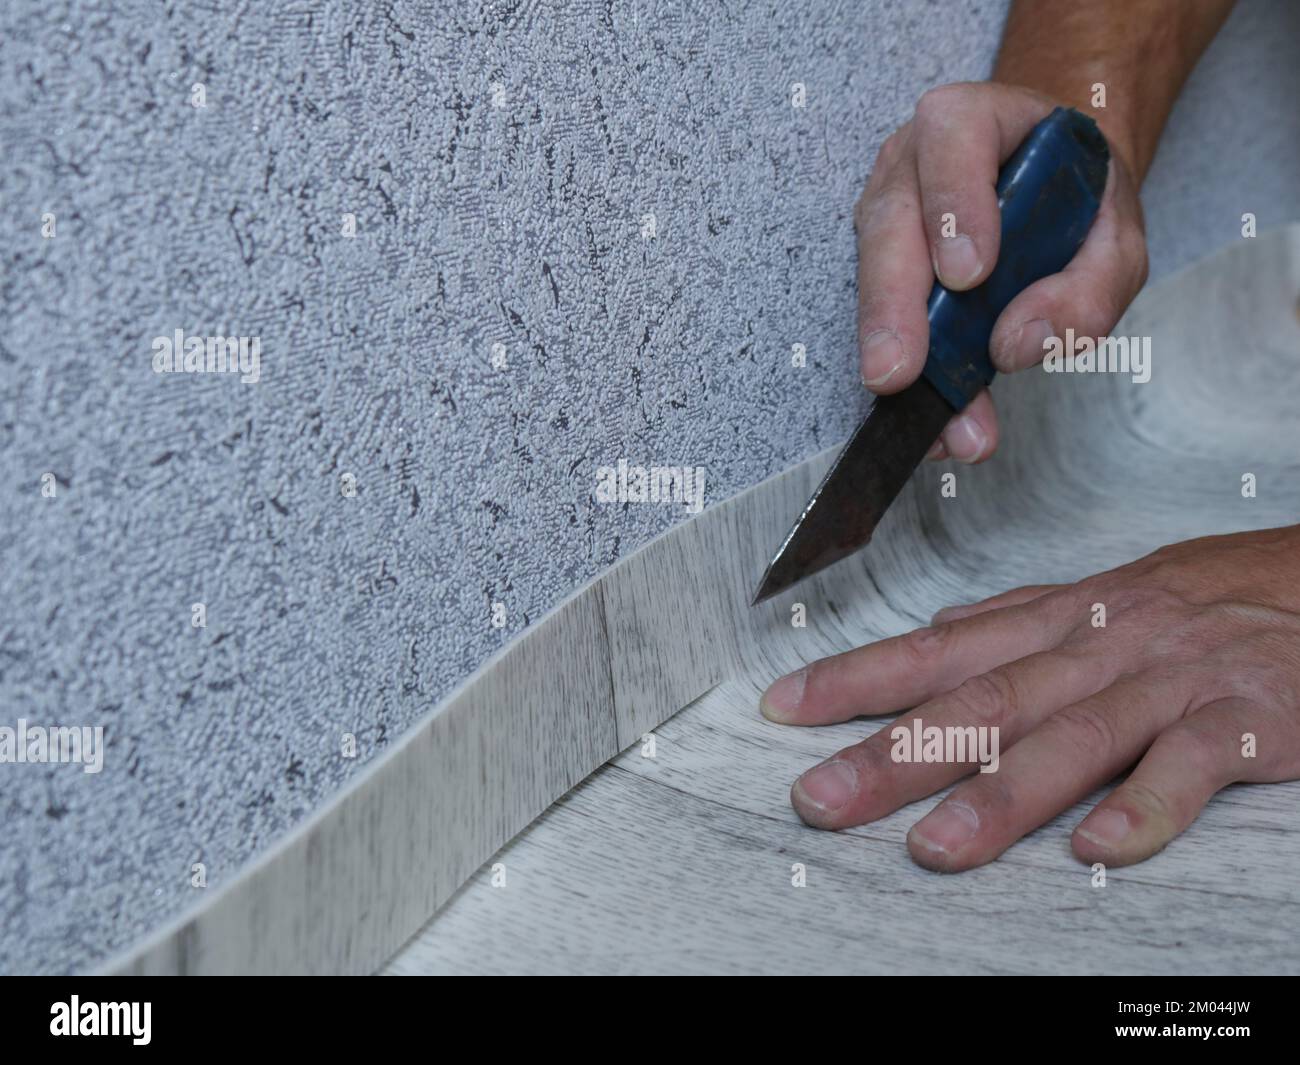 cutting linoleum with a short knife at the junction of the floor and wall, fitting the carpet to the size of the room, male hands cut light linoleum Stock Photo